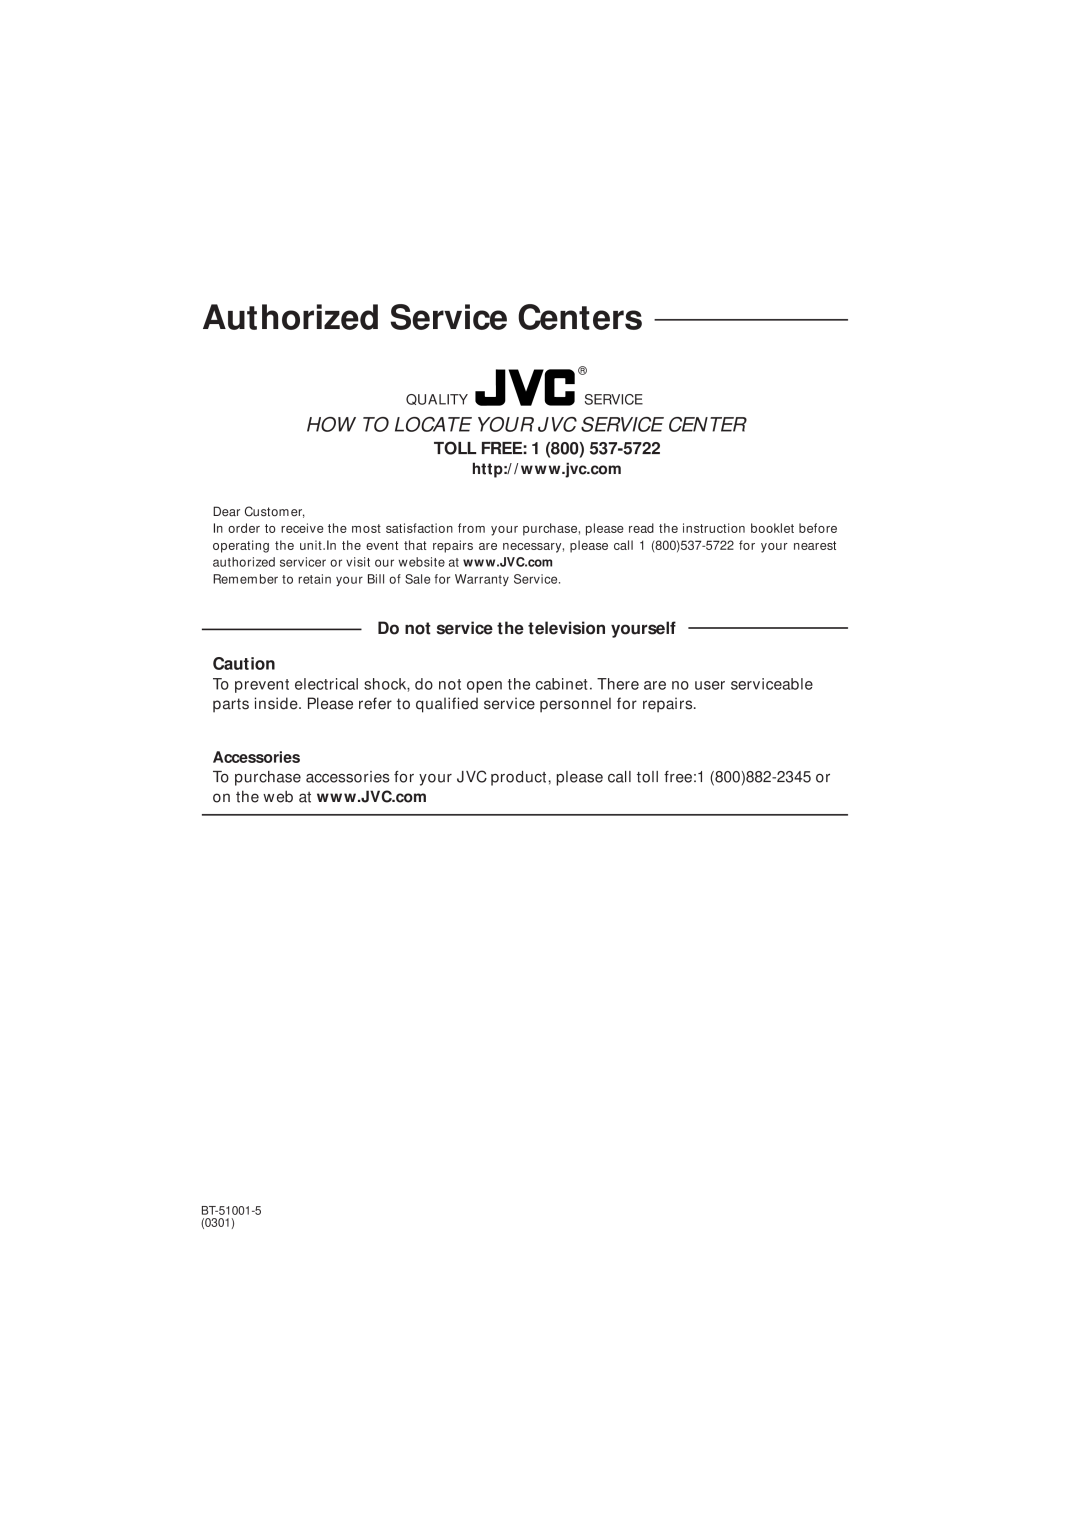 JVC HX-GX7 manual Accessories, Authorized Service Centers, How To Locate Your Jvc Service Center, Toll Free 